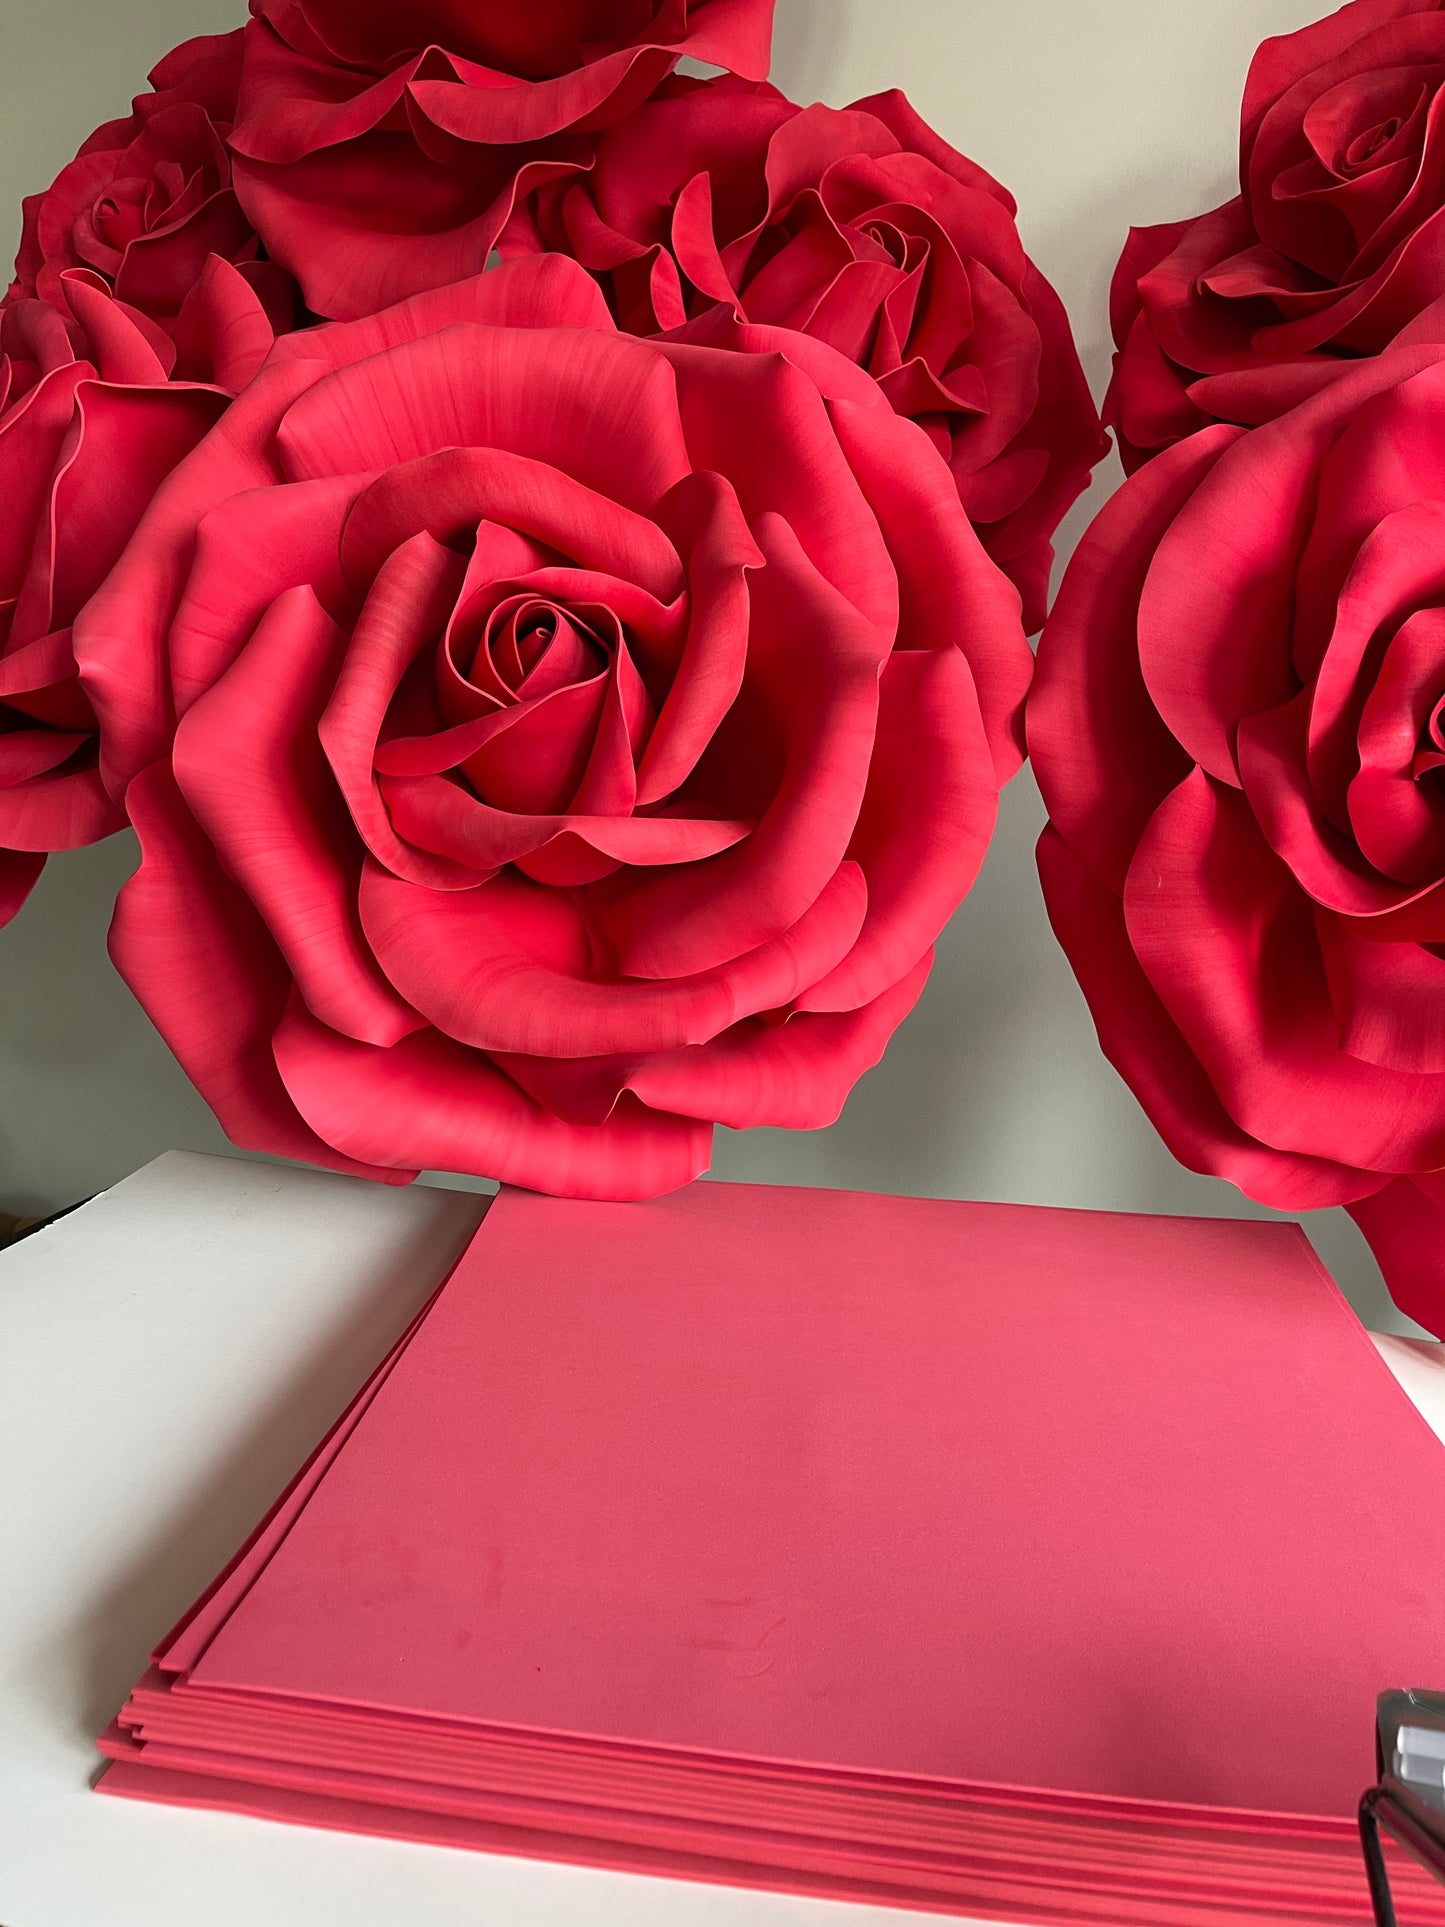 Pre Order for Soft Eva Foam 2 mm thickness Sheets 50x50 cm for Giant Flowers Making